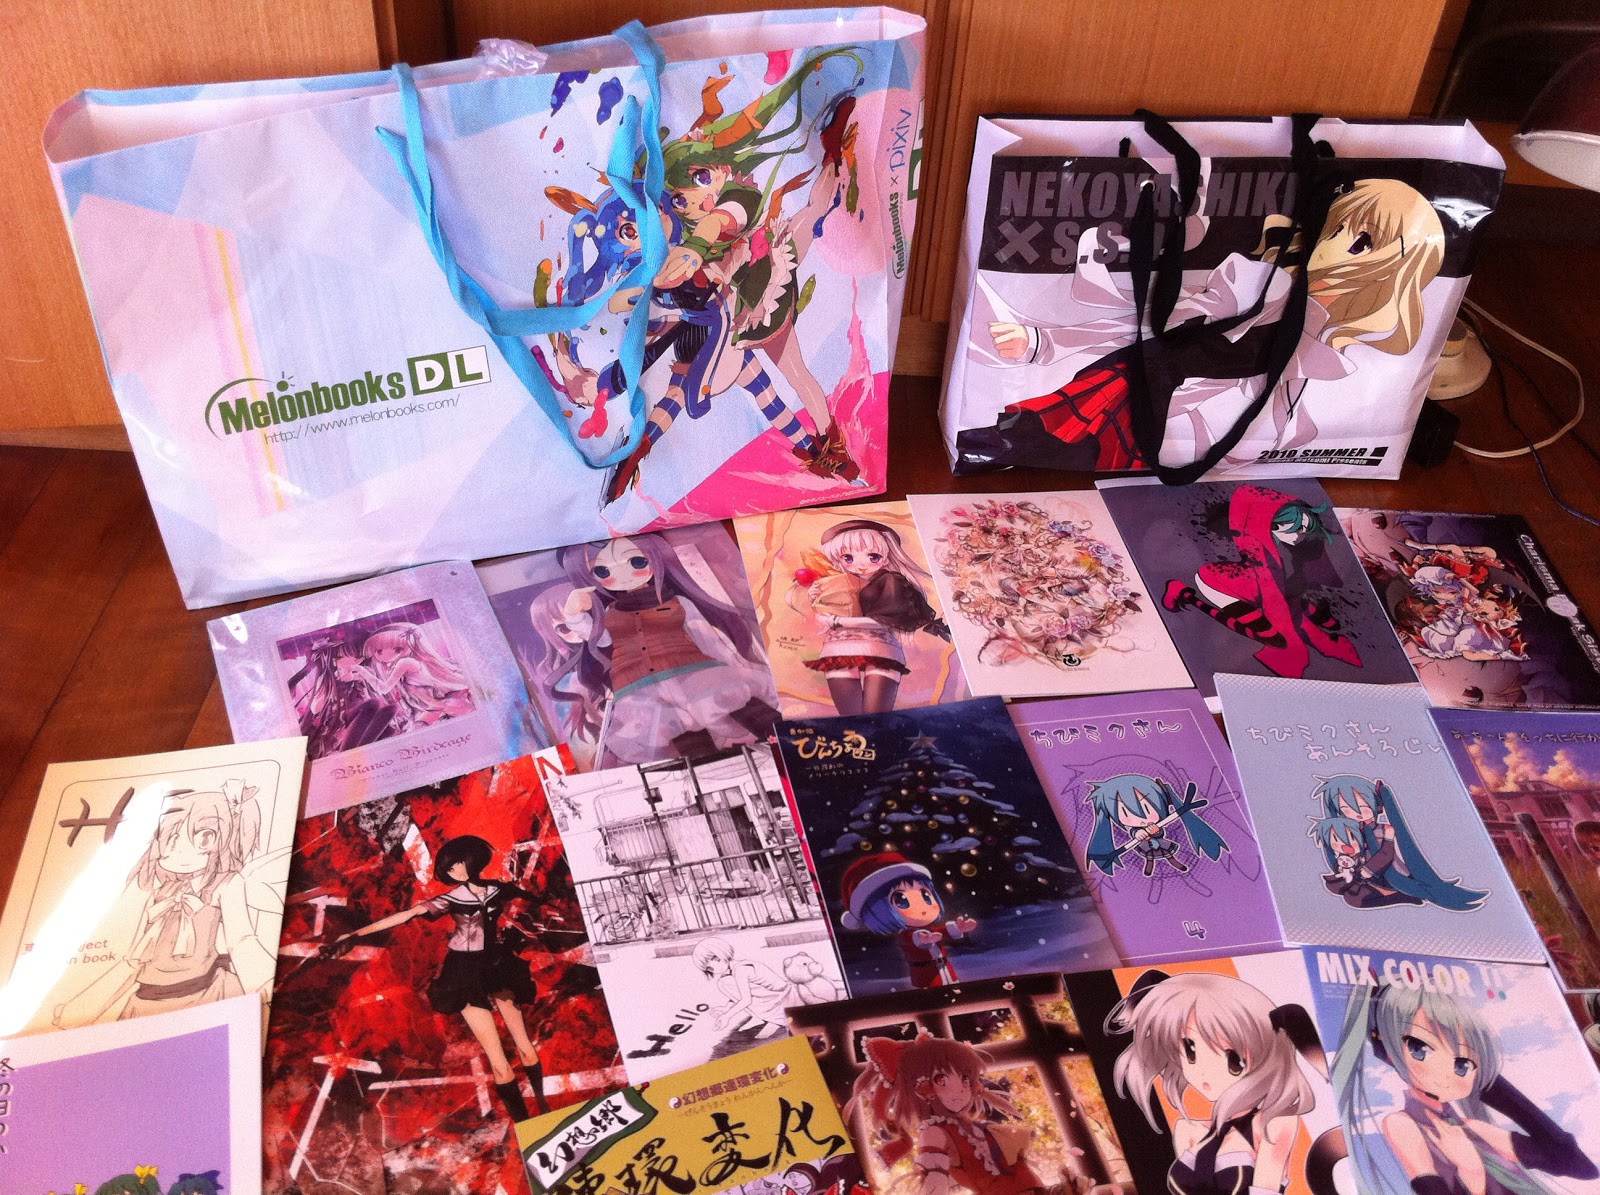 As usual my spending was mostly on Doujin stuff.